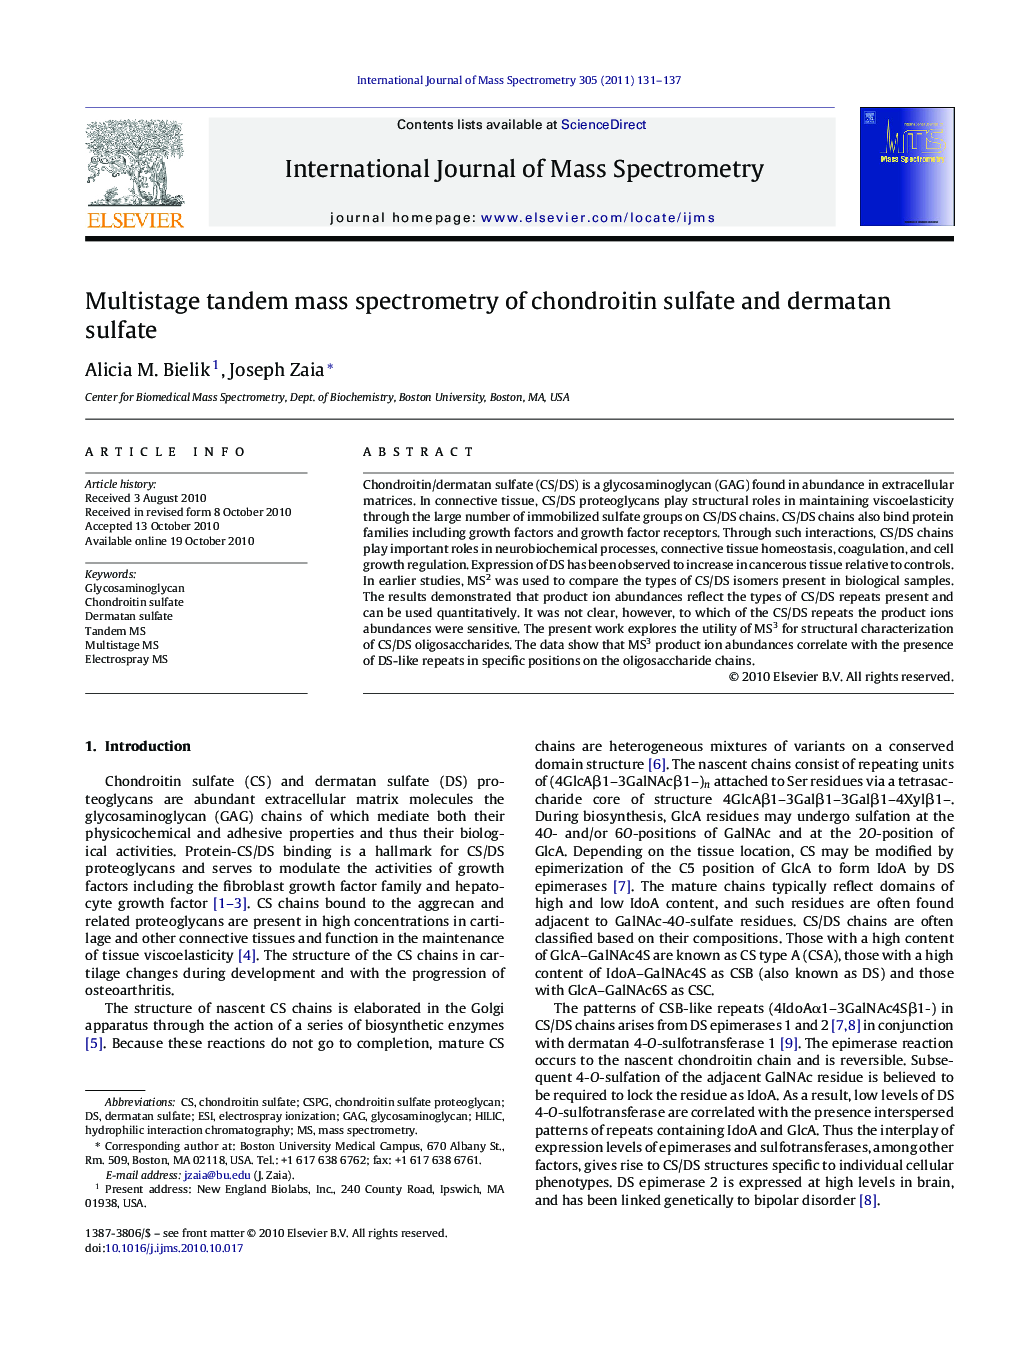 Multistage tandem mass spectrometry of chondroitin sulfate and dermatan sulfate